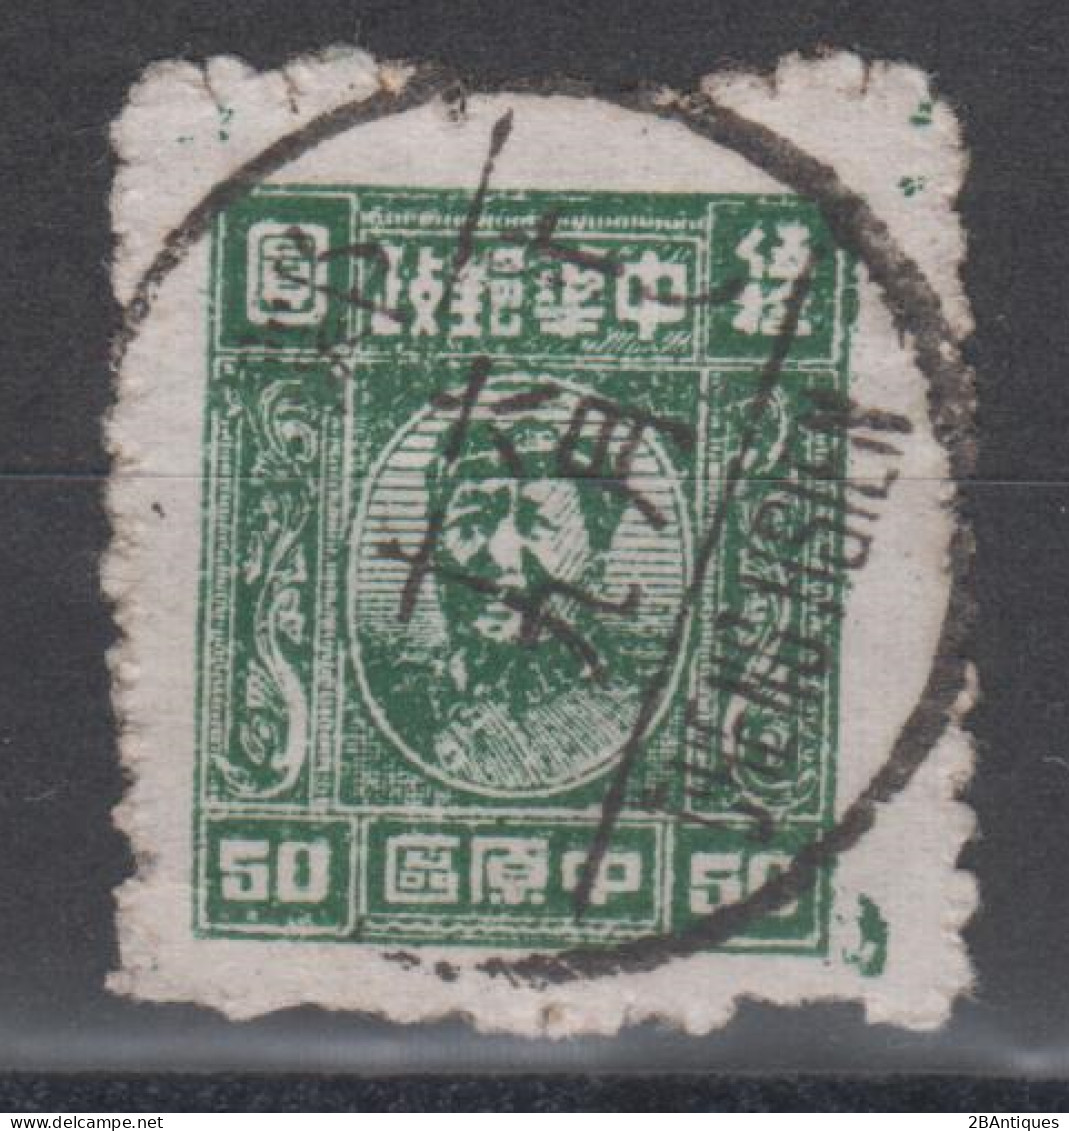 CENTRAL CHINA 1949 - Mao With Very Fine Cancellation - Central China 1948-49